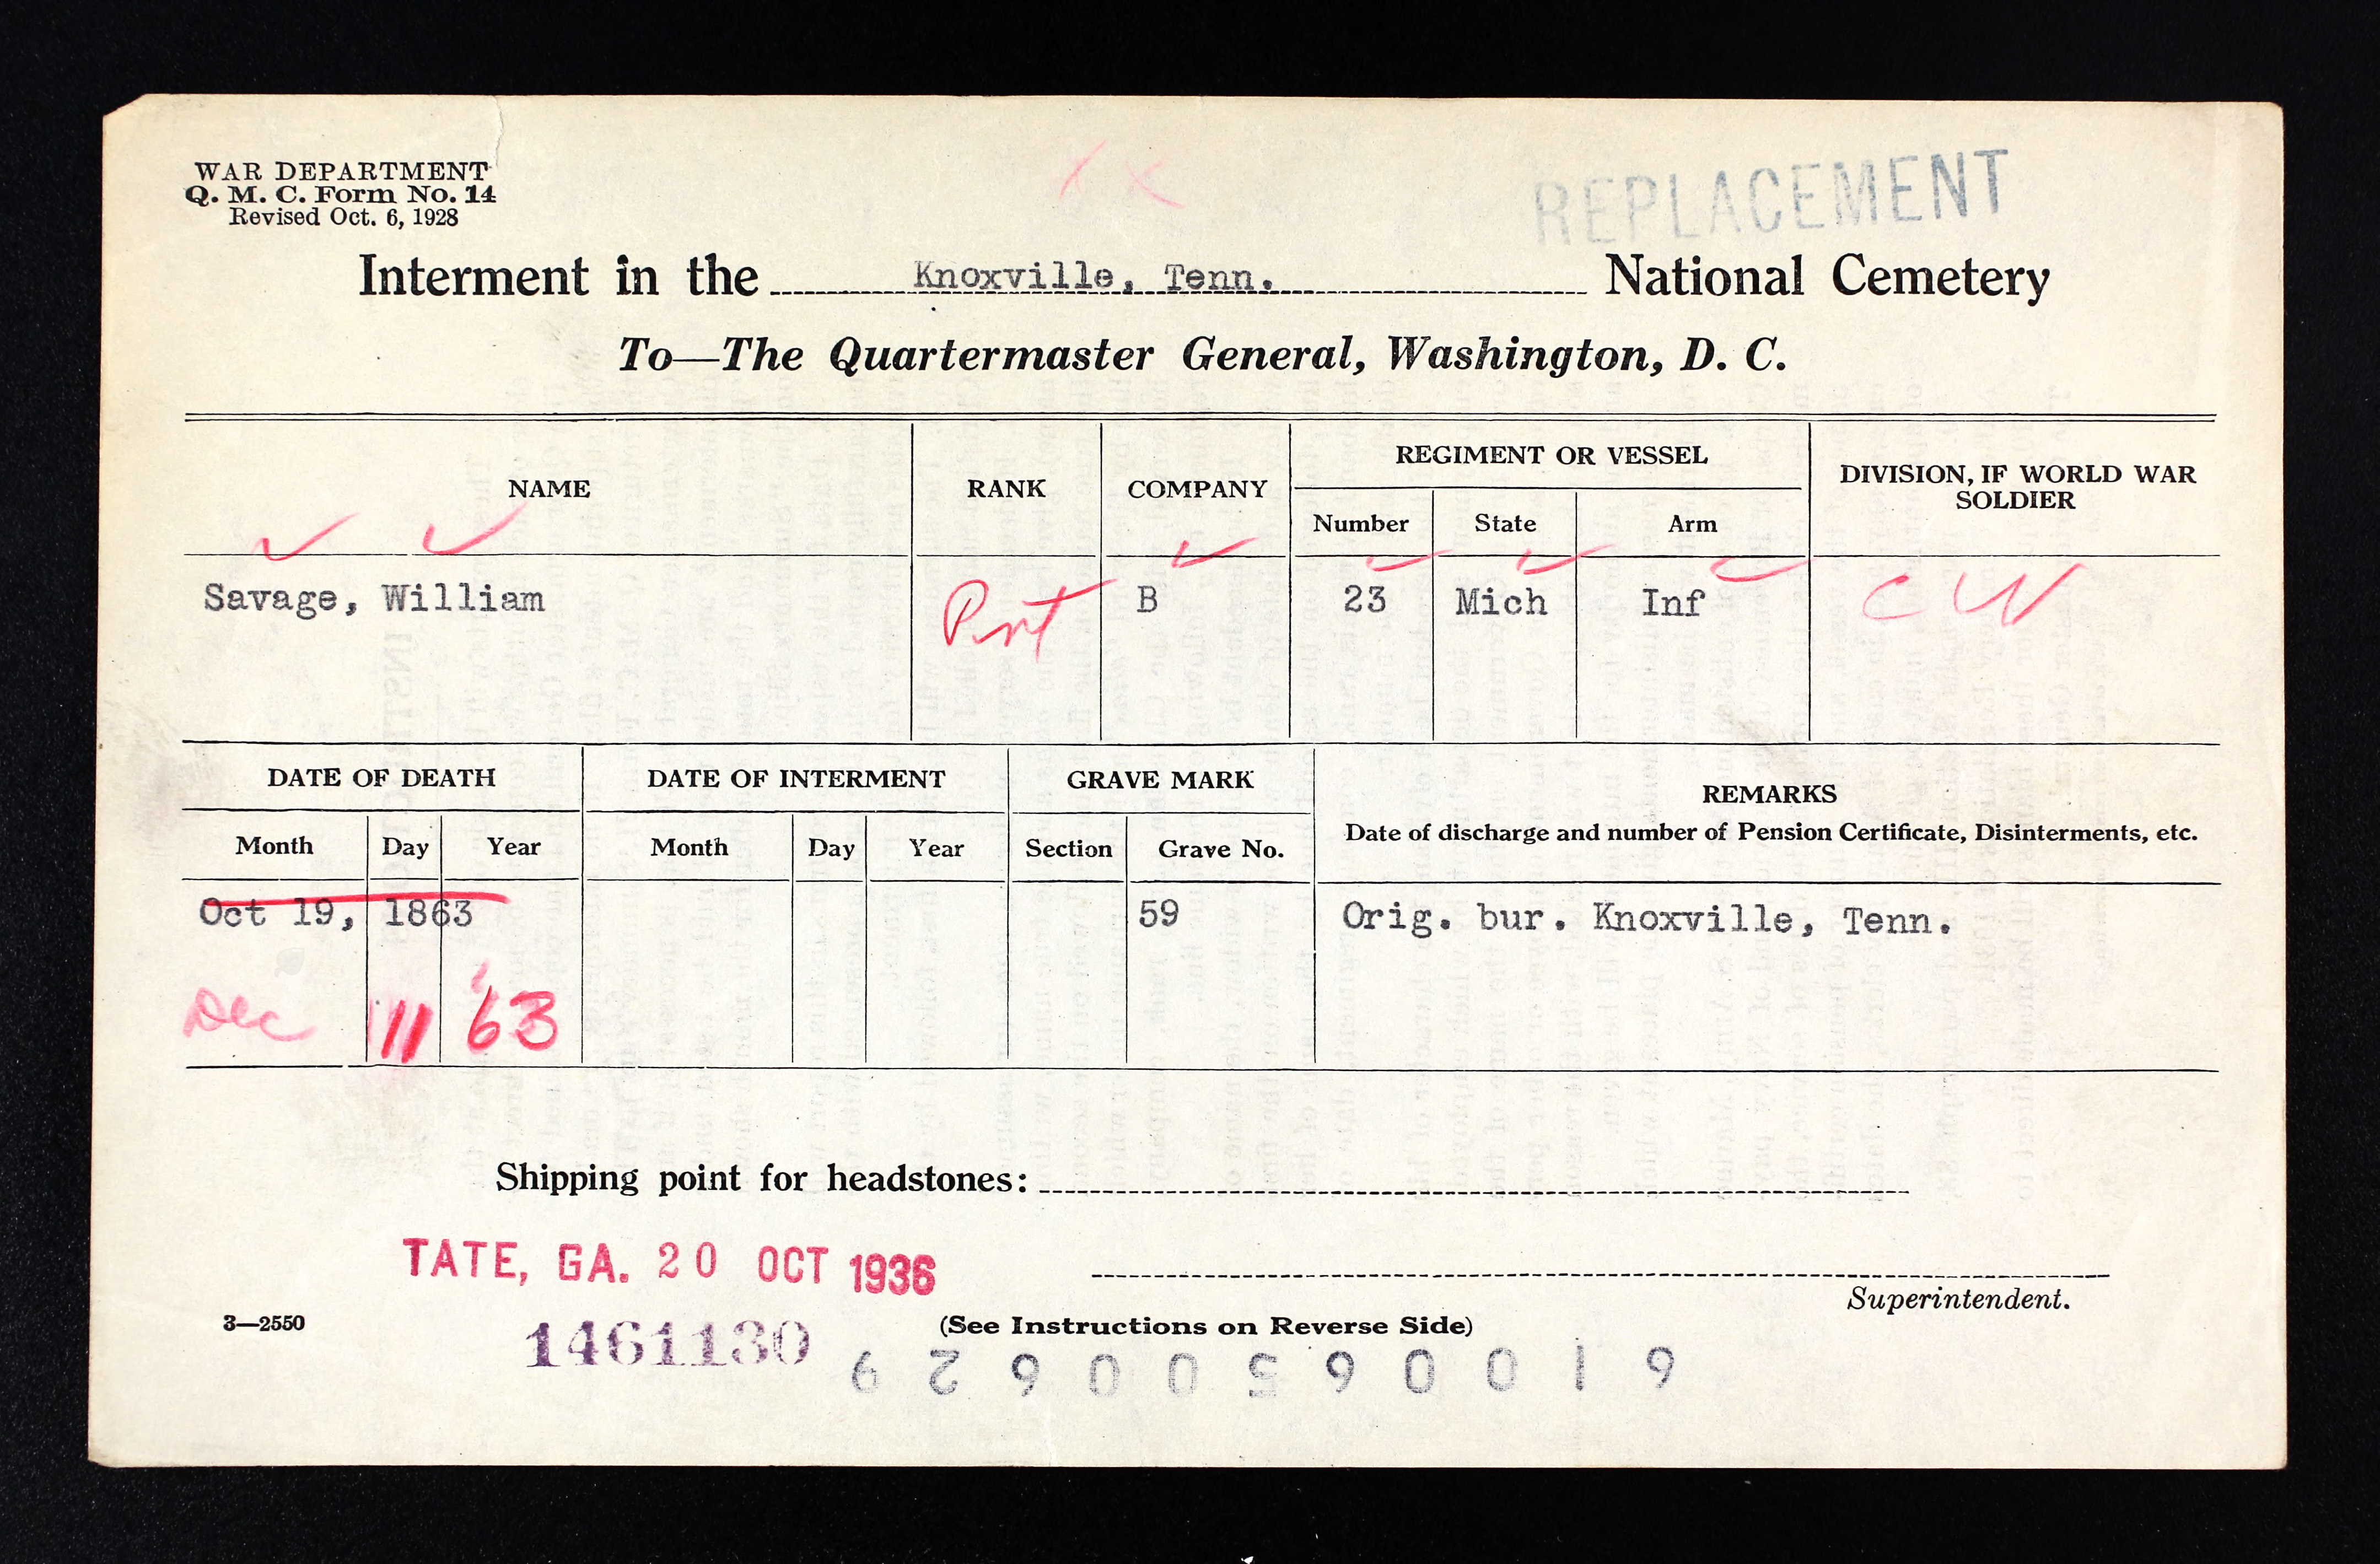 (William Savage, US National Cemetery Interment Control Forms)